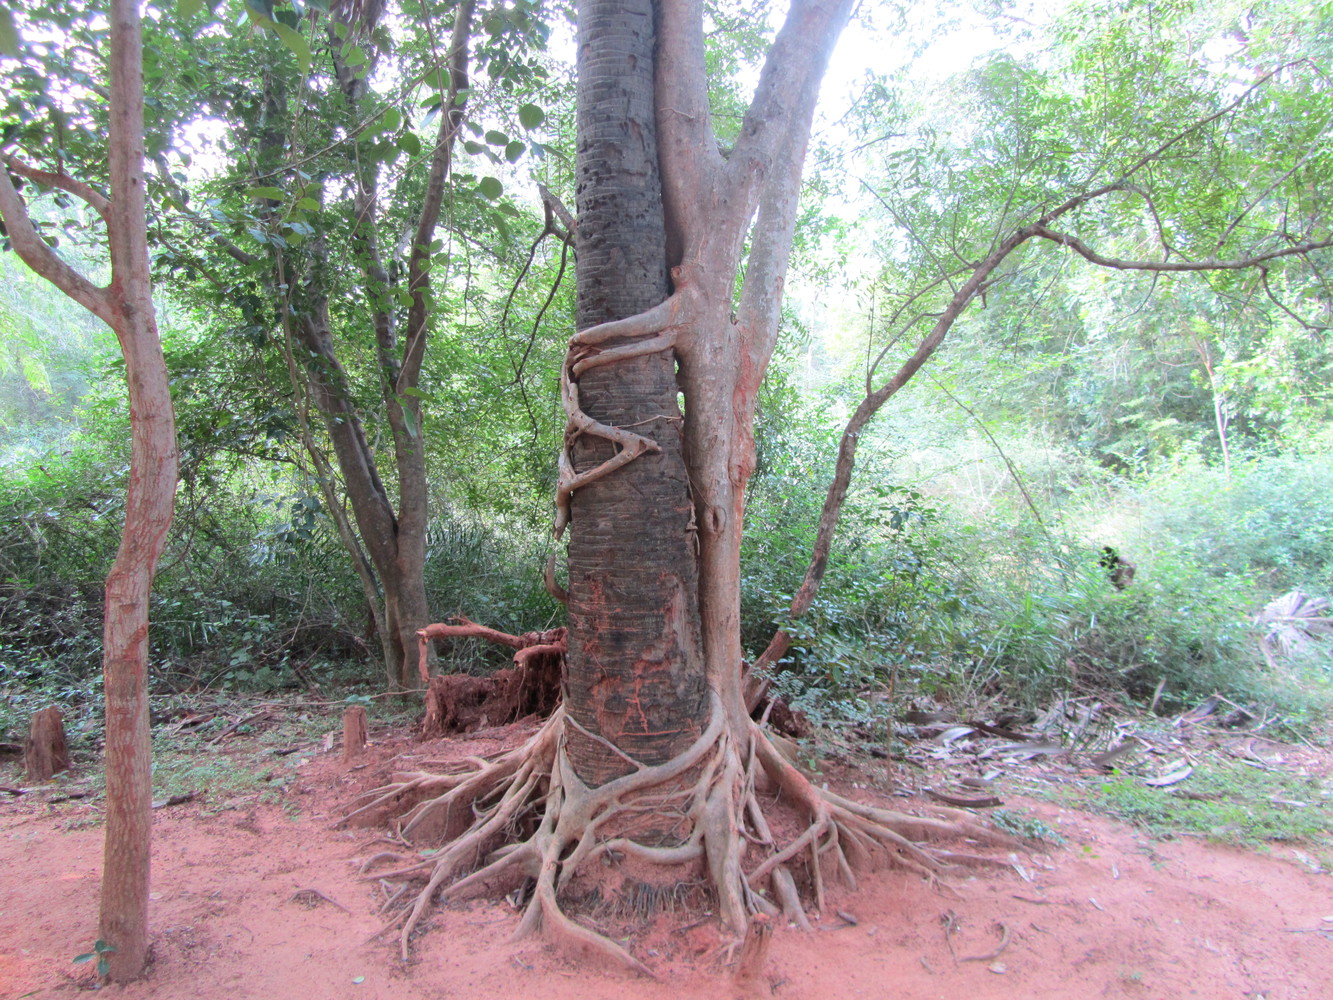 The roots of a tree extending horizontally and wrapping around the cylindrical trunk of another tree thereby appearing to be hugging it